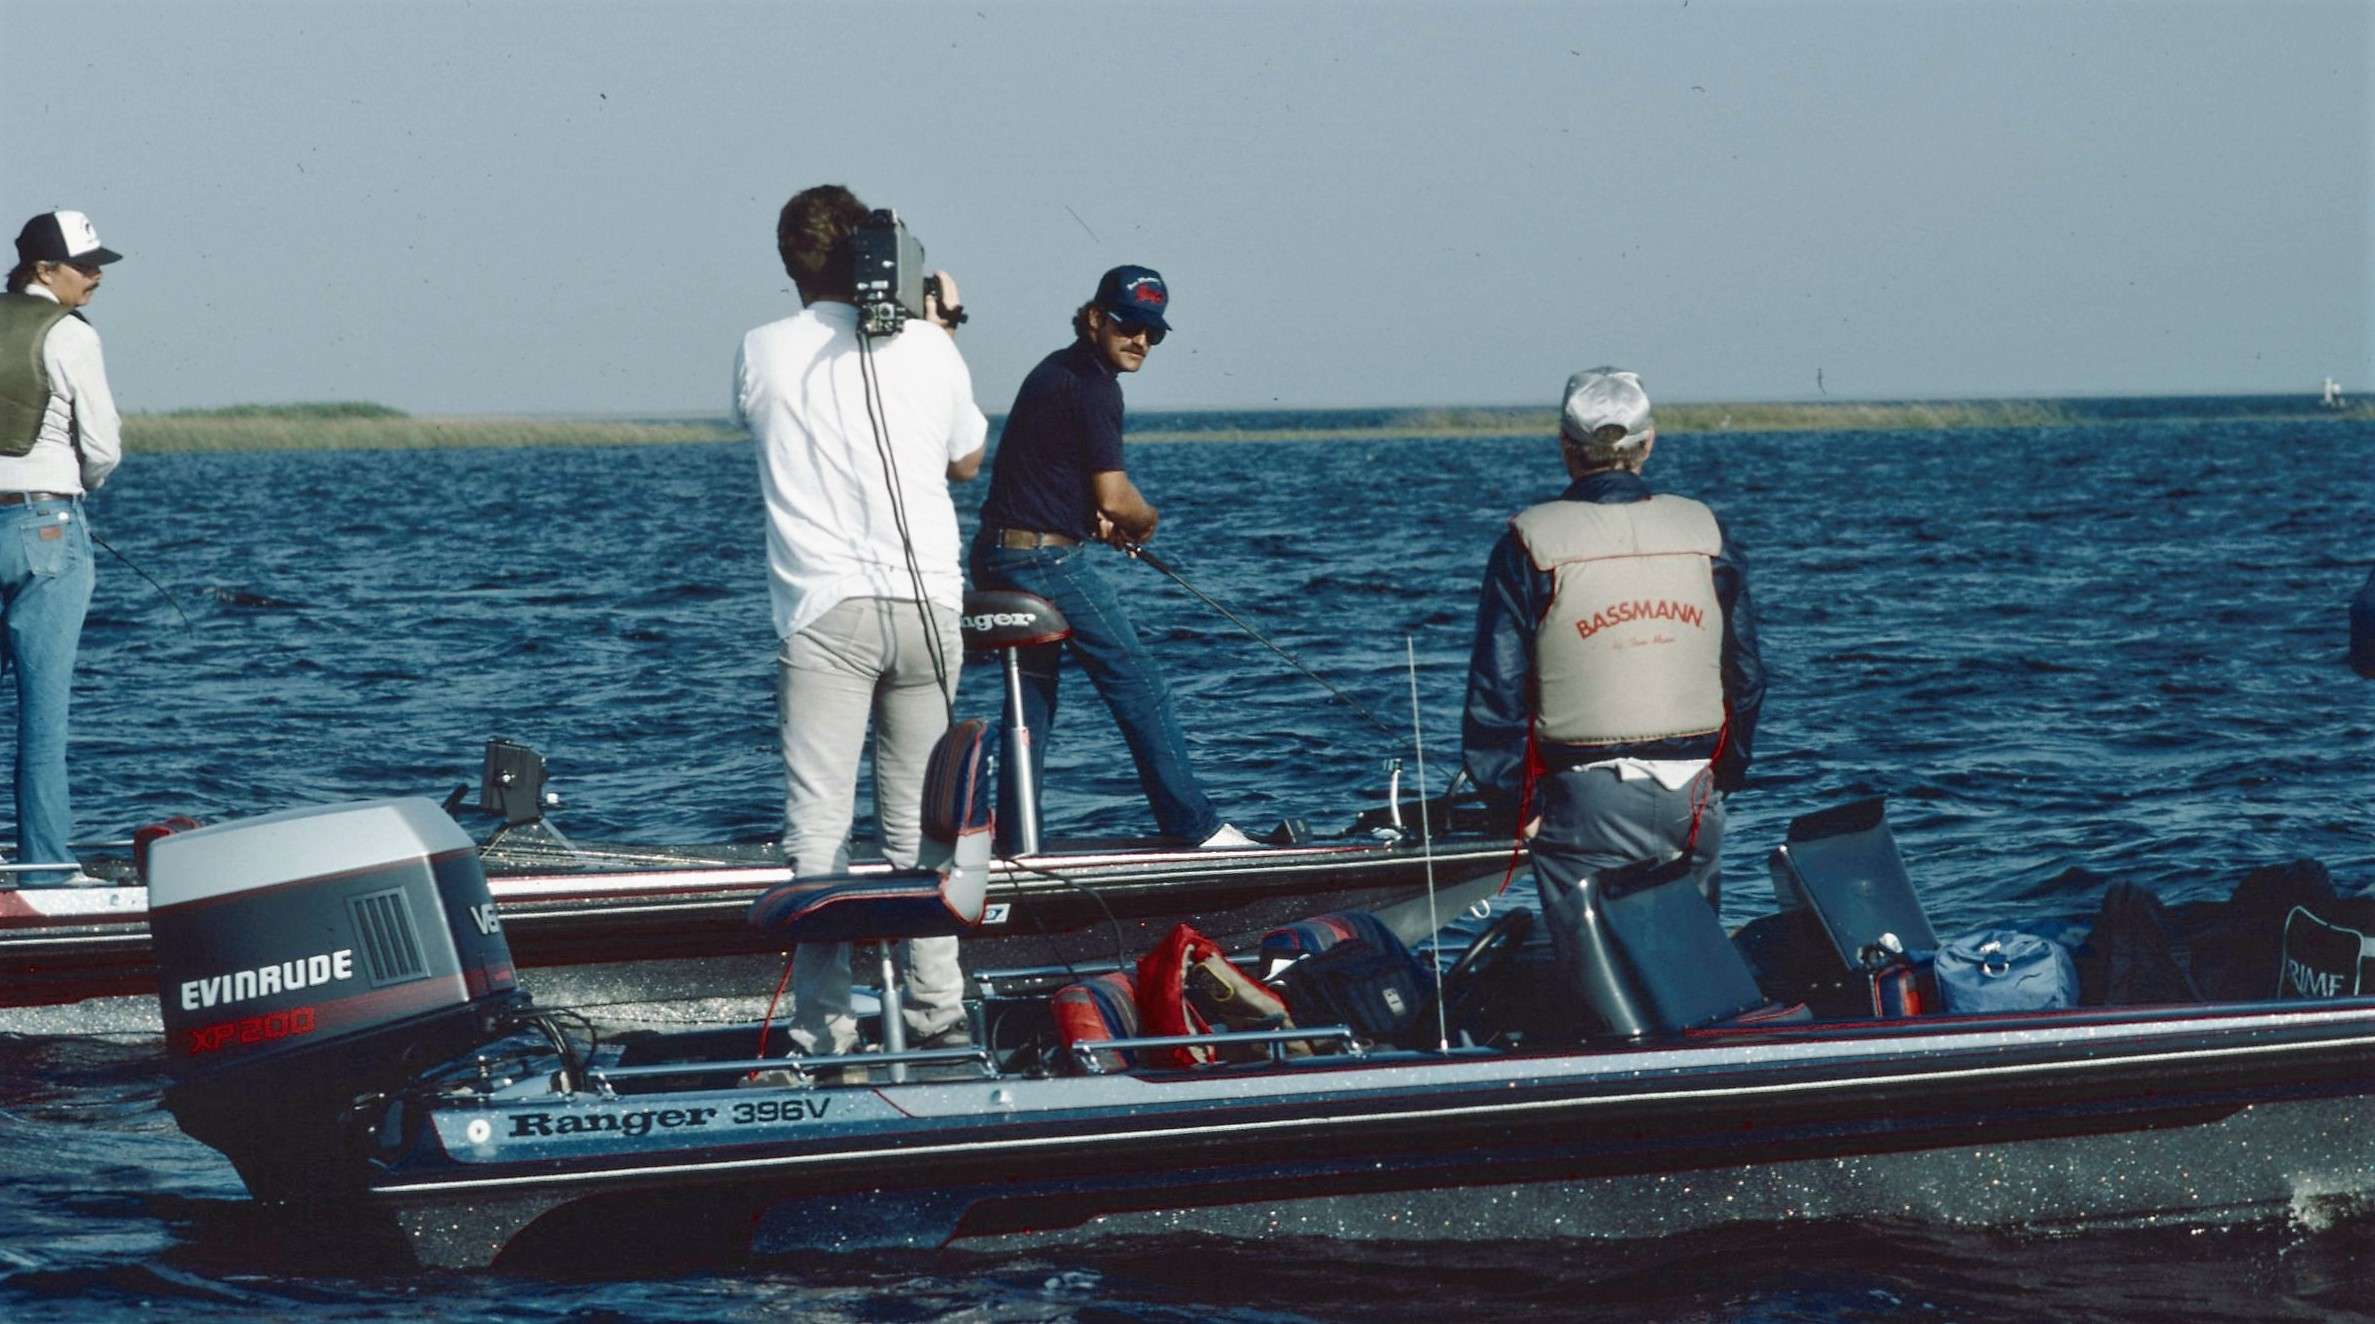   The new Pro-Am format was kicked off in south Florida and amateurs would be attracted to the event with a purse of their own, while paying a decreased entry fee and sticking to the back of the boat. The idea worked. According to B.A.S.S. records, more than 900 amateurs called in hoping to get a shot at spending a day in the backseat with a professional. And one amateur spent the night on the doorstep of B.A.S.S. headquarters so he would be the first to sign up.